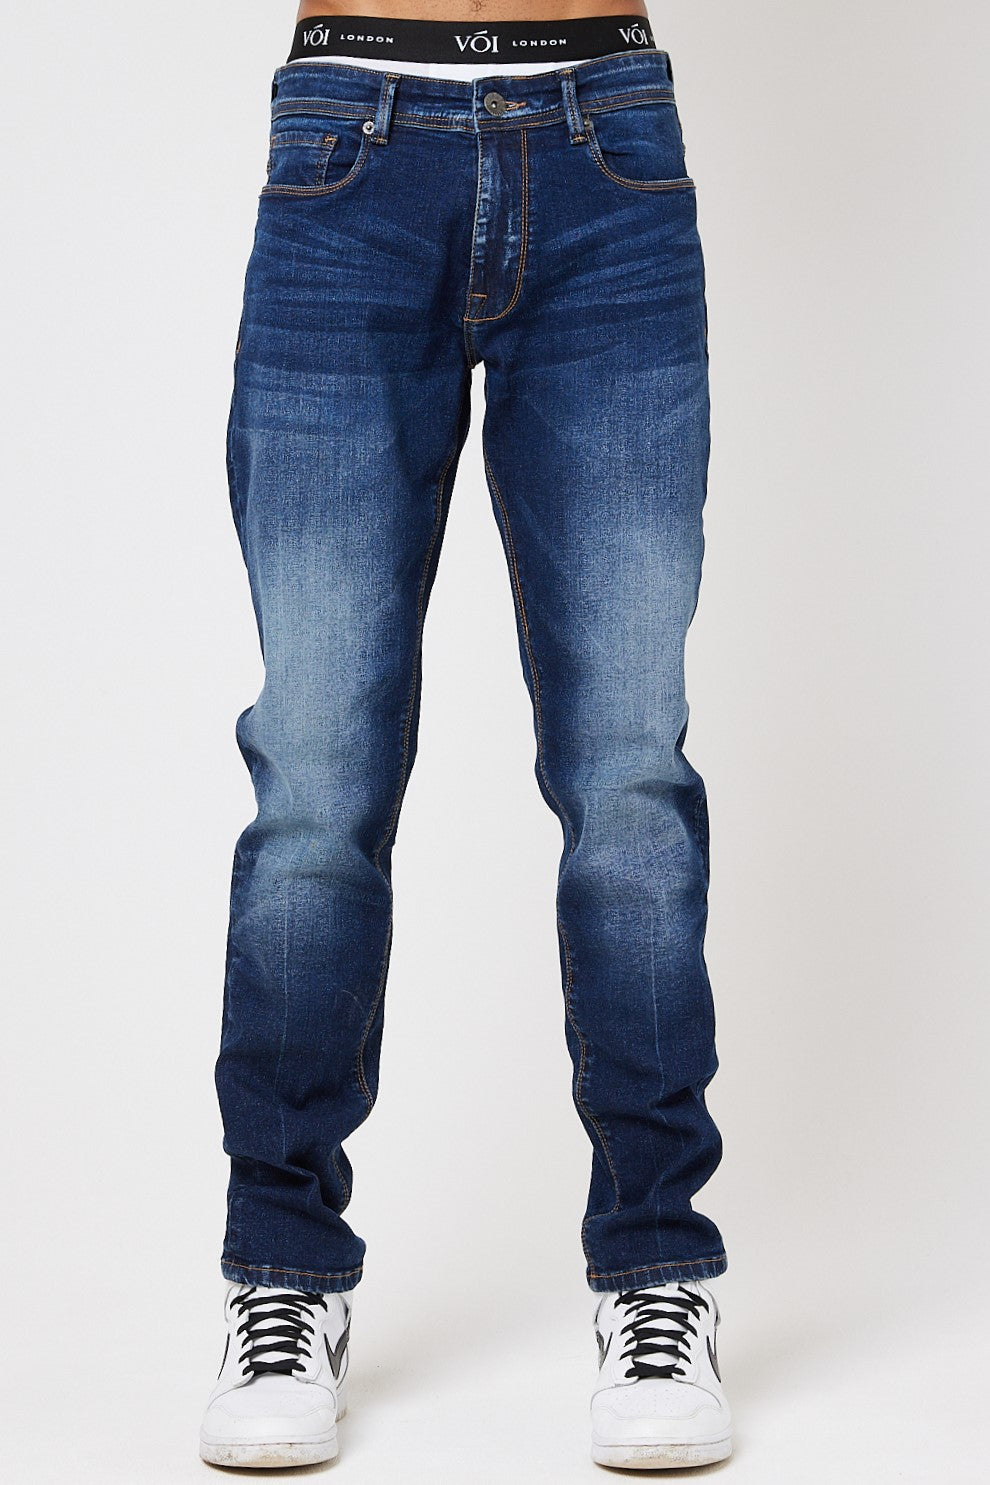 Richmond Tapered Jeans - Dark Blue product